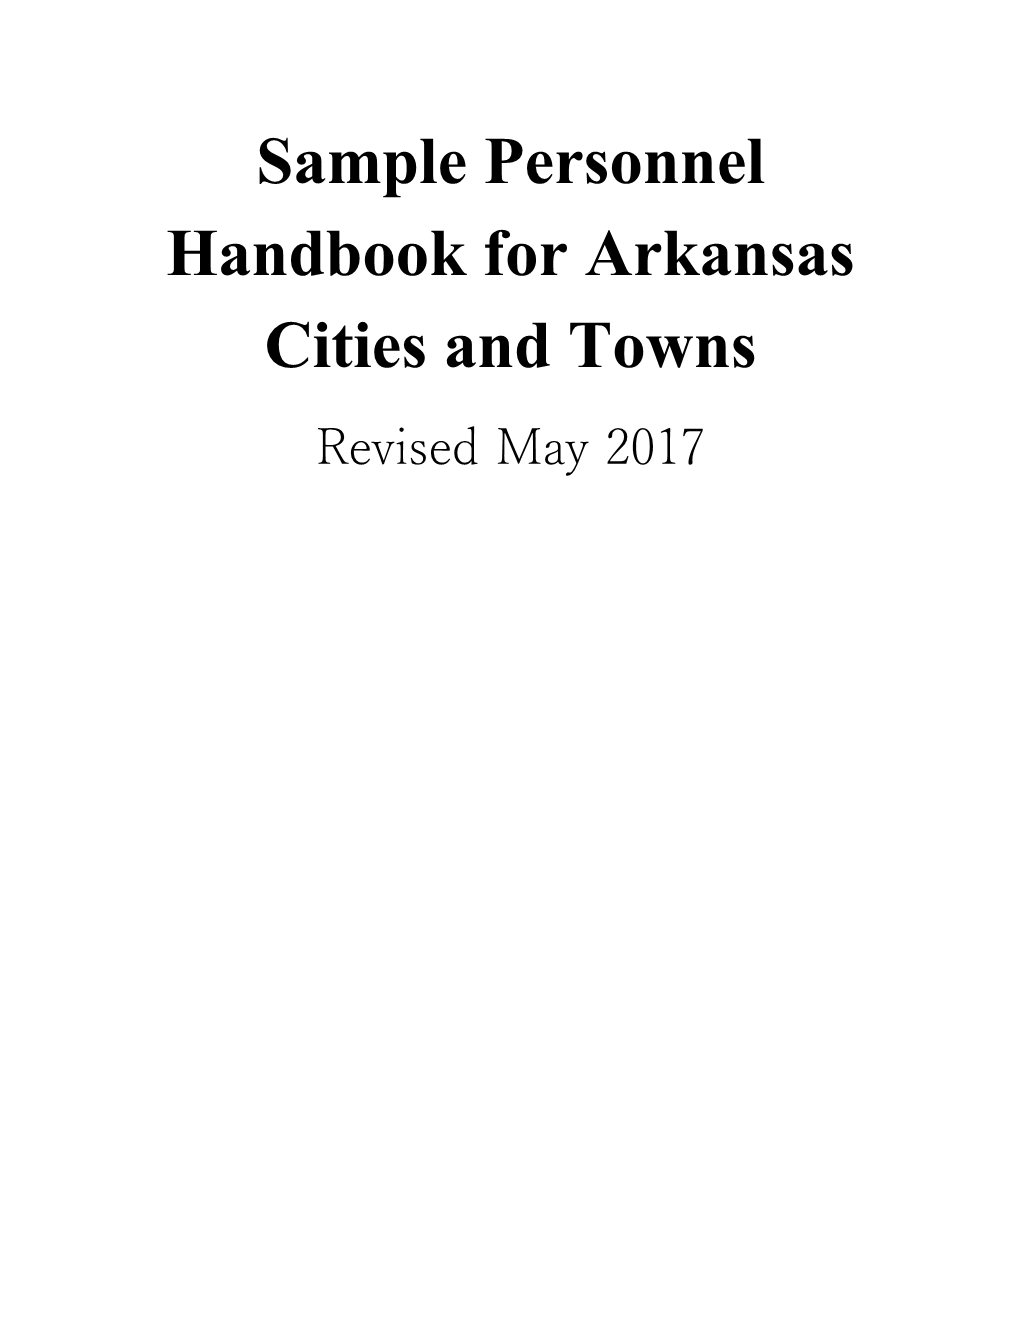 Sample Personnel Handbook for Arkansas Cities and Towns